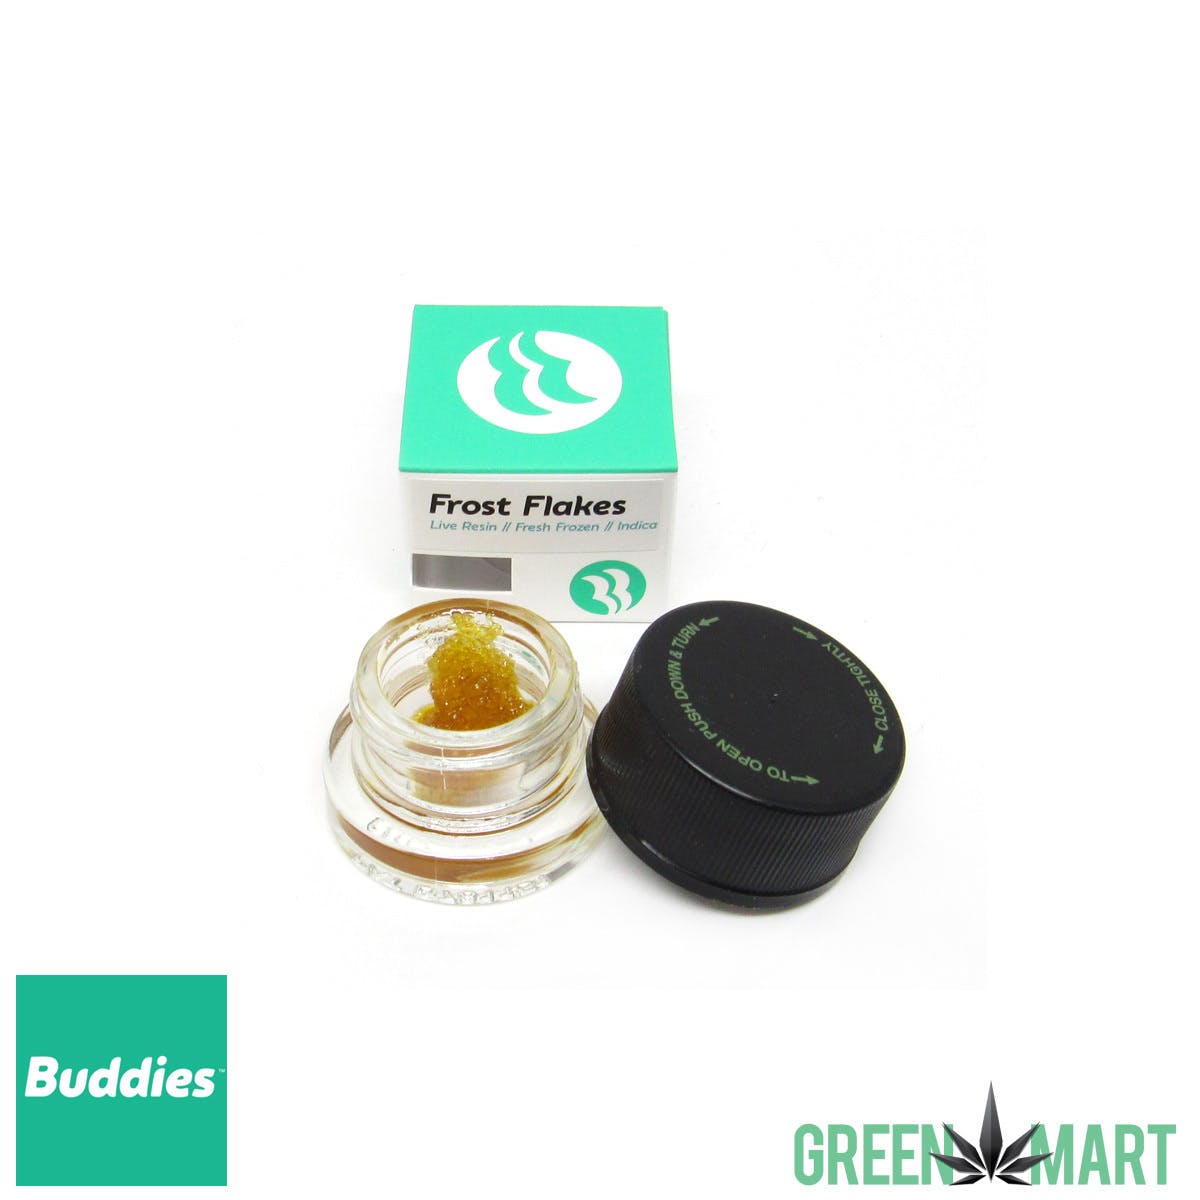 Buddies 1g Live Resin - Frost Flakes